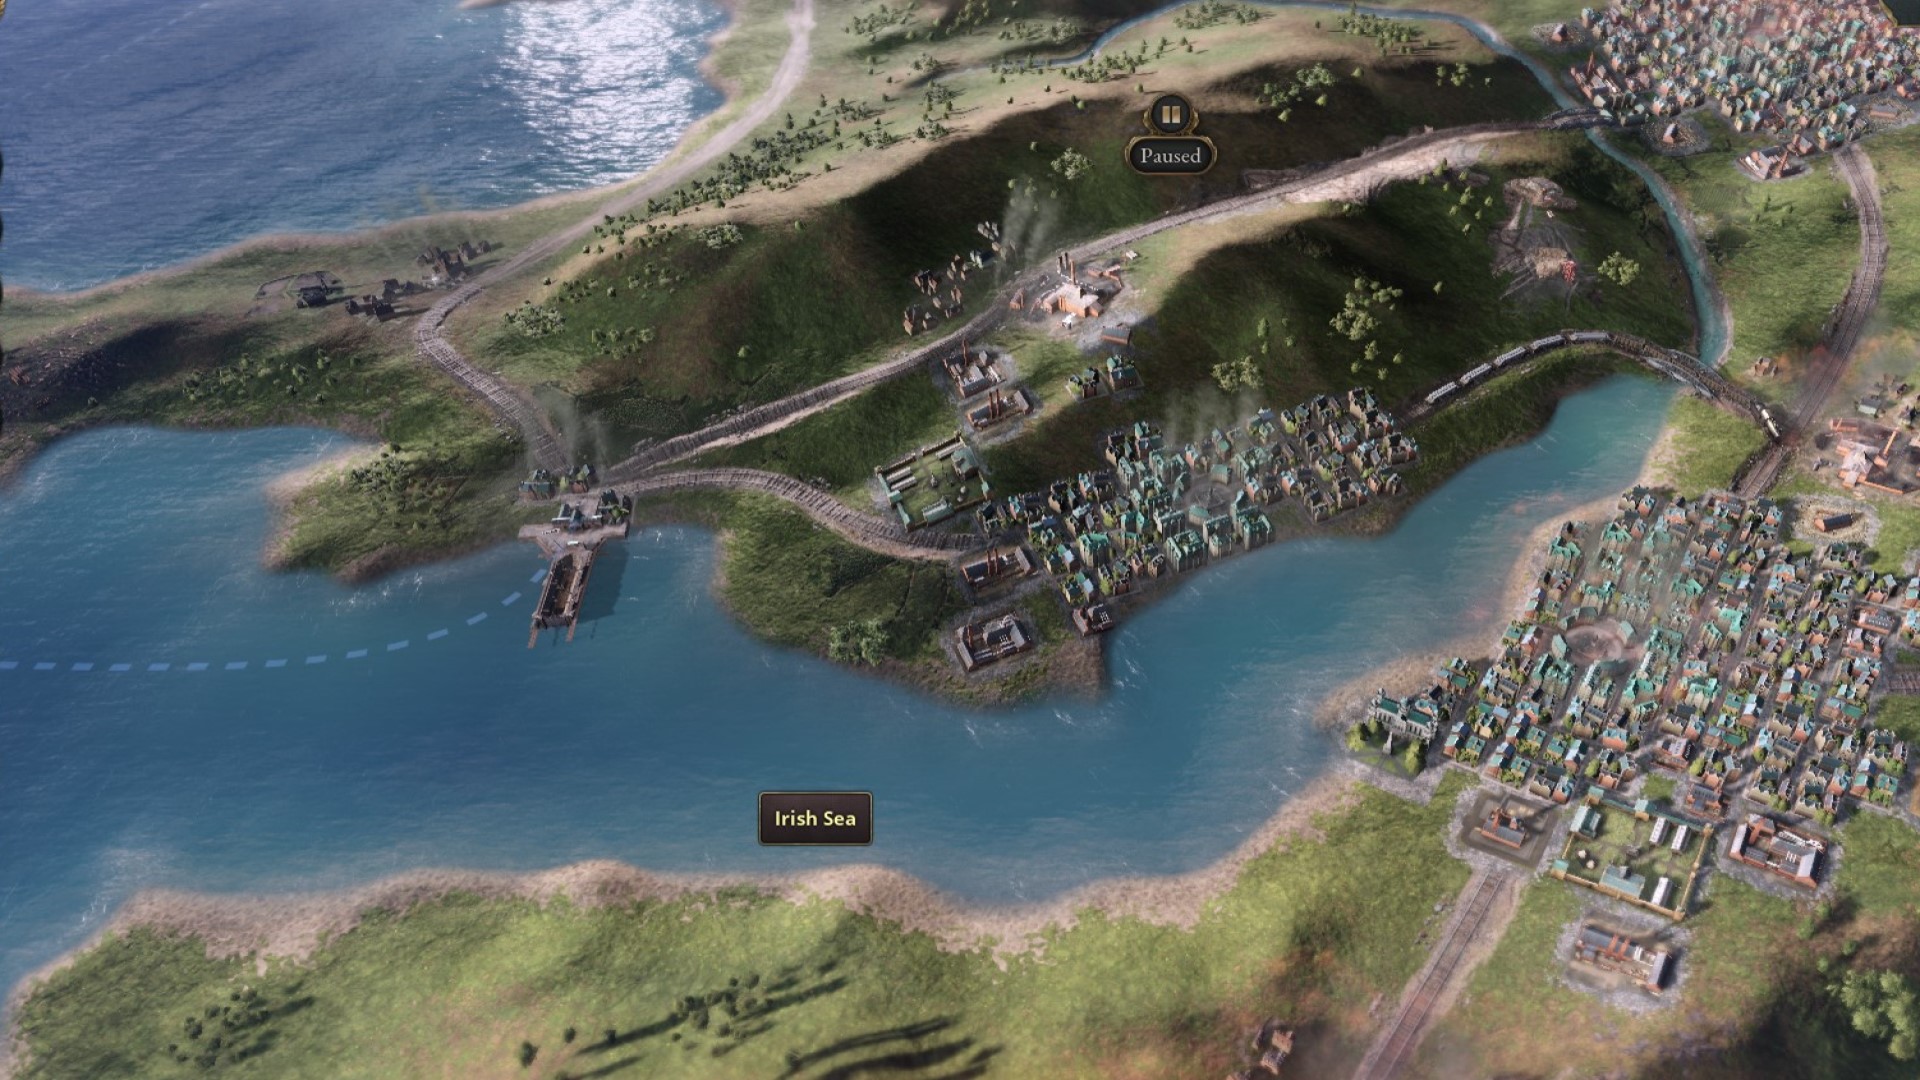 Victoria 3 review - the coast of britain, showing large cities.